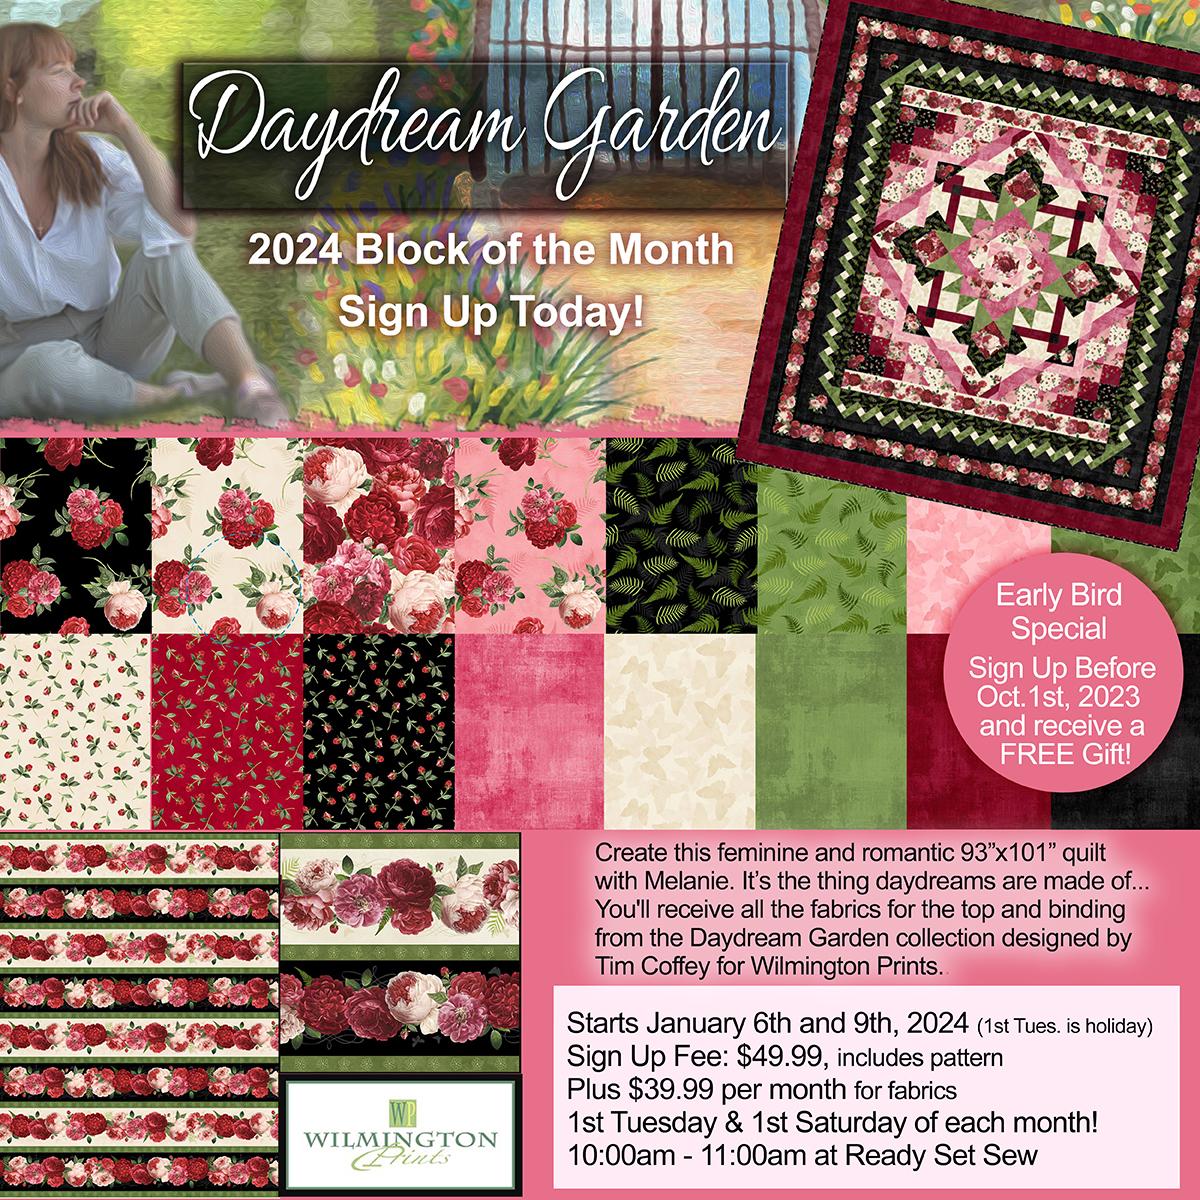 01/06/2024 Daydream Garden 2024 Block of the Month Sign Up